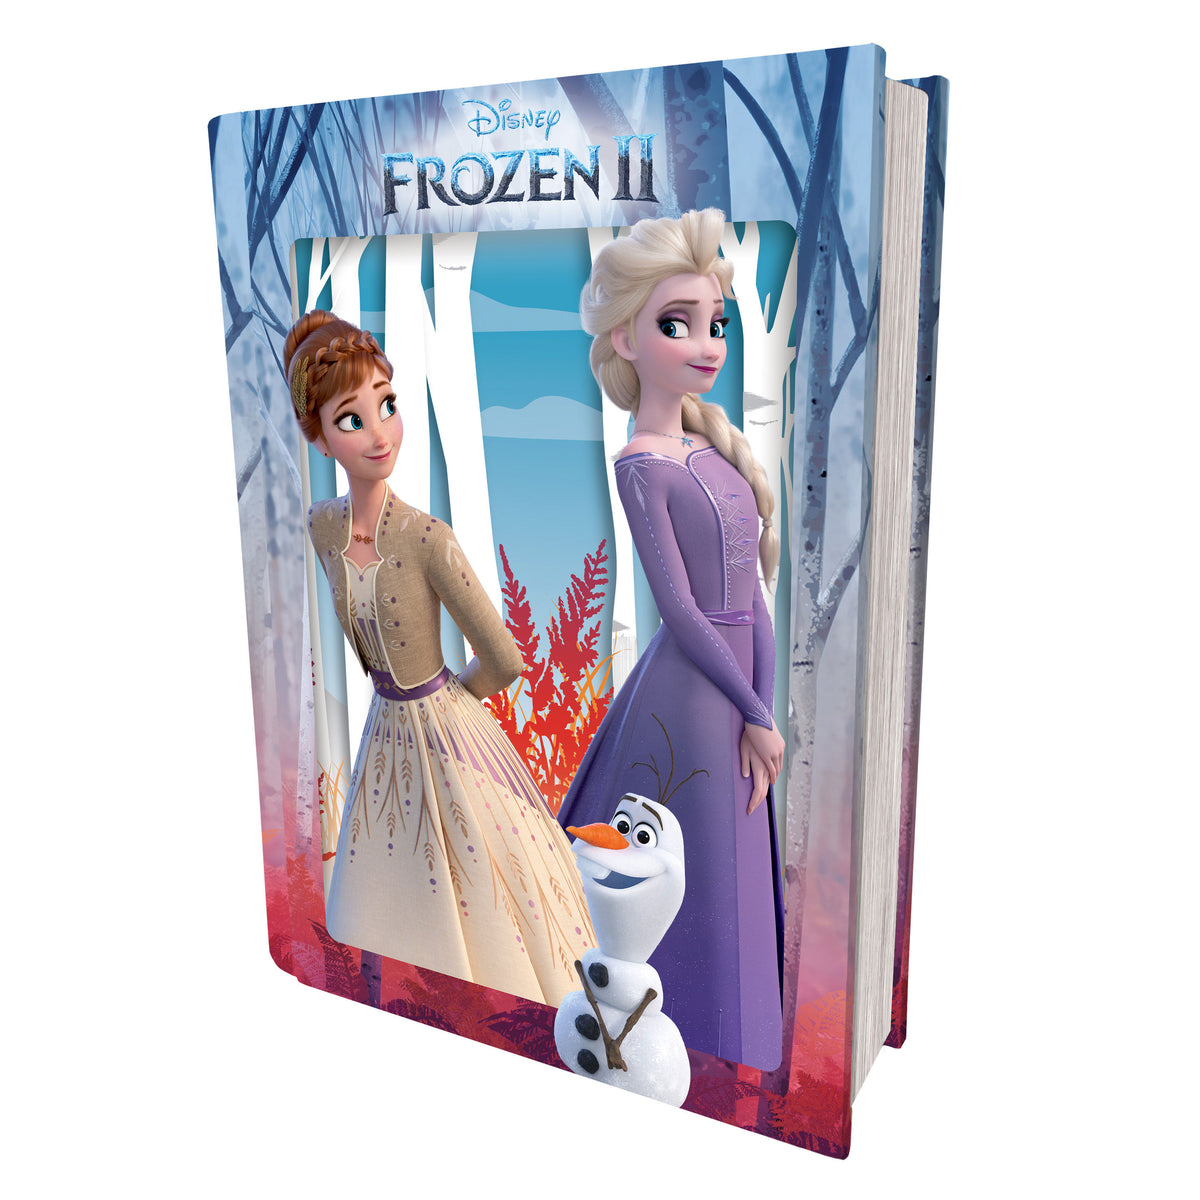 Frozen Disney 3D Jigsaw Puzzle in Tin Book Packaging 35559 300pc 18x12"